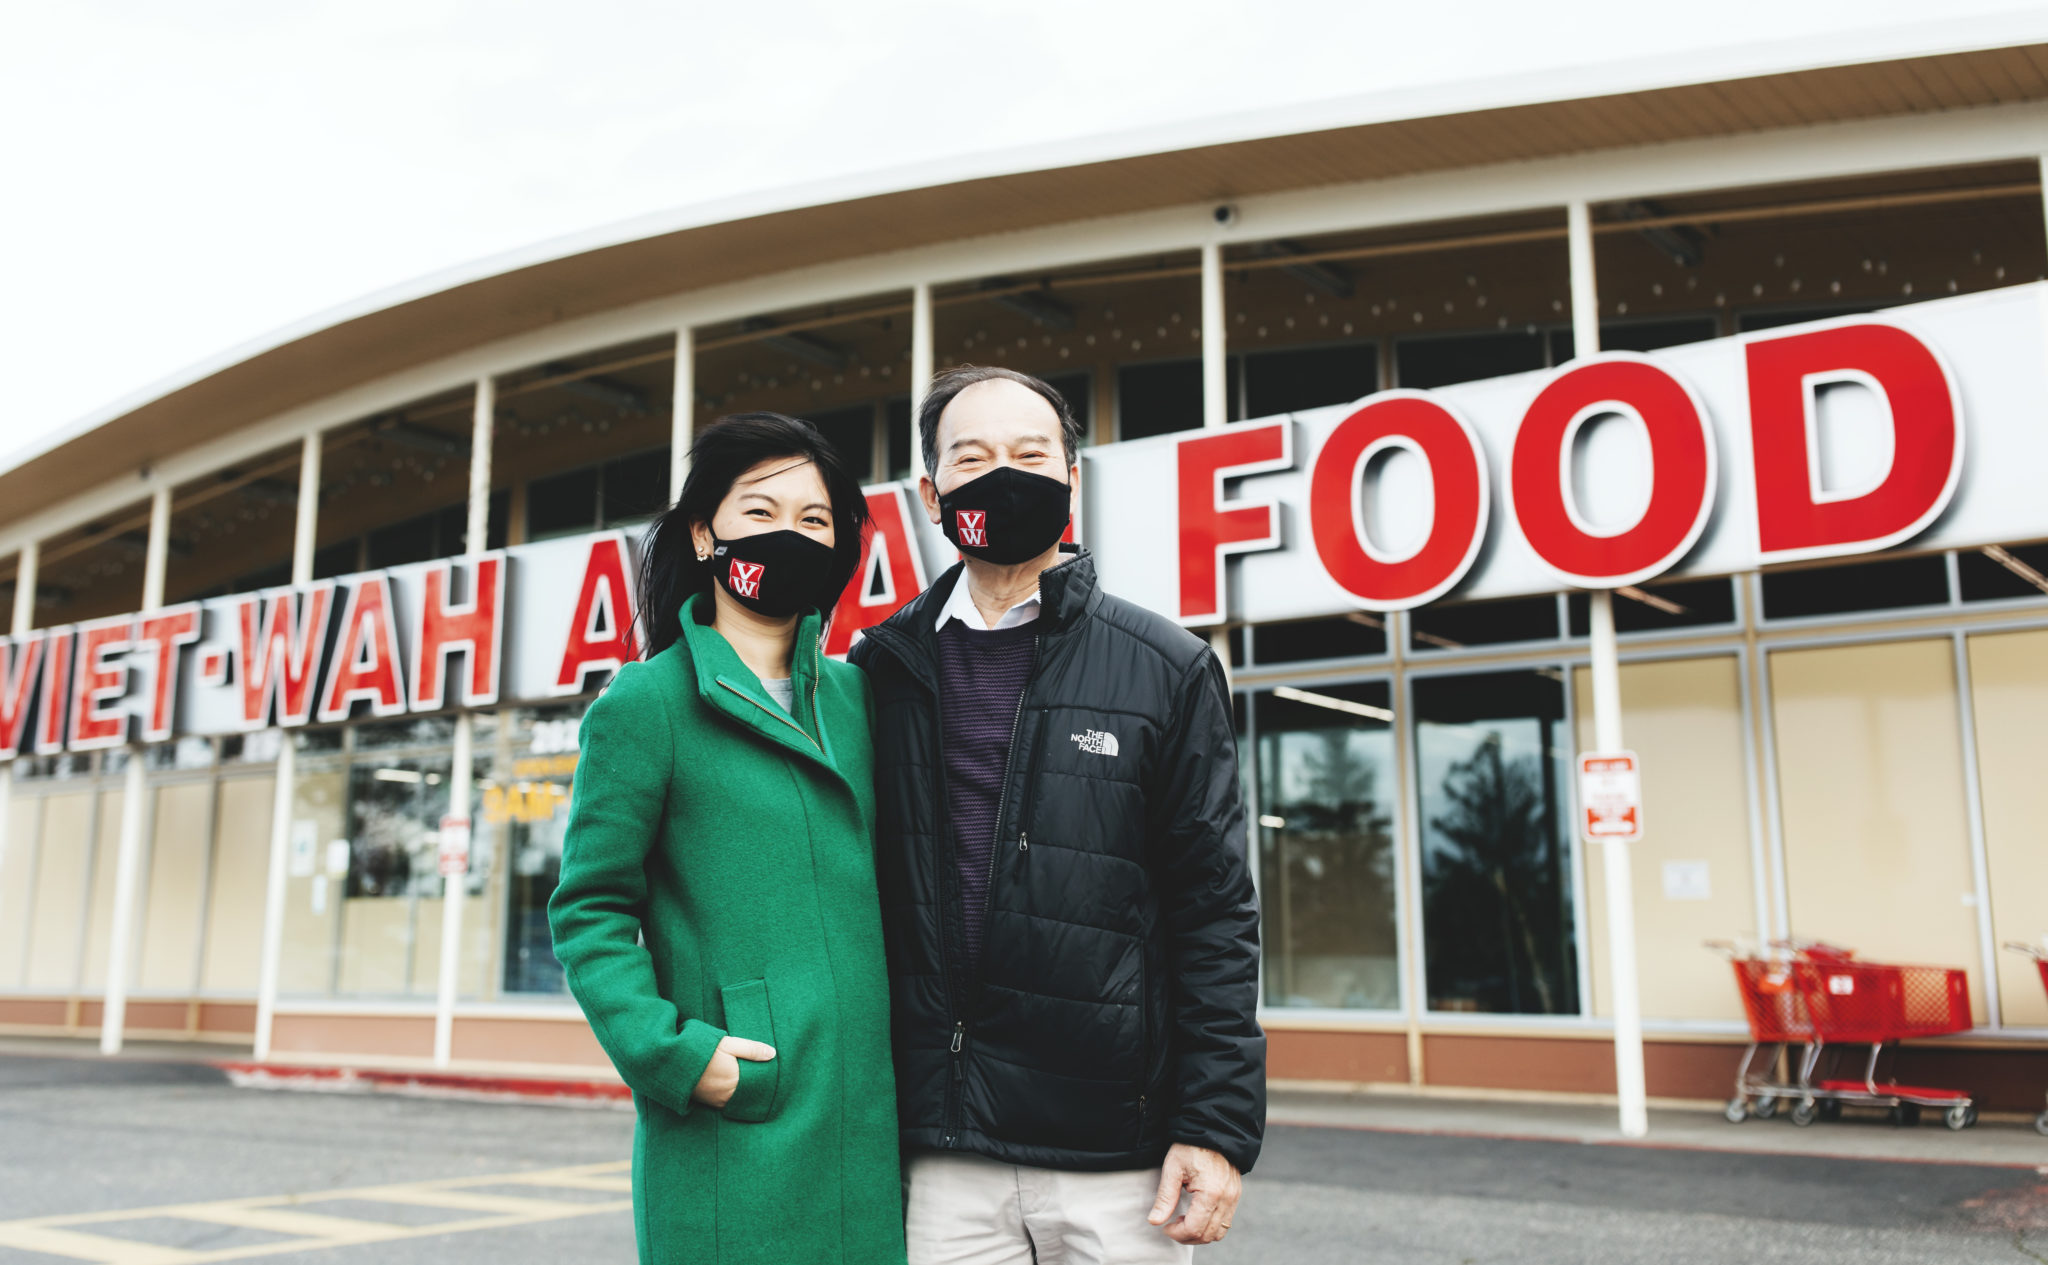 Locals know they’ll find the specialty items they need at Viet-Wah Asian Food Market, owned by Leeching Tran and her father, Duc Tran.